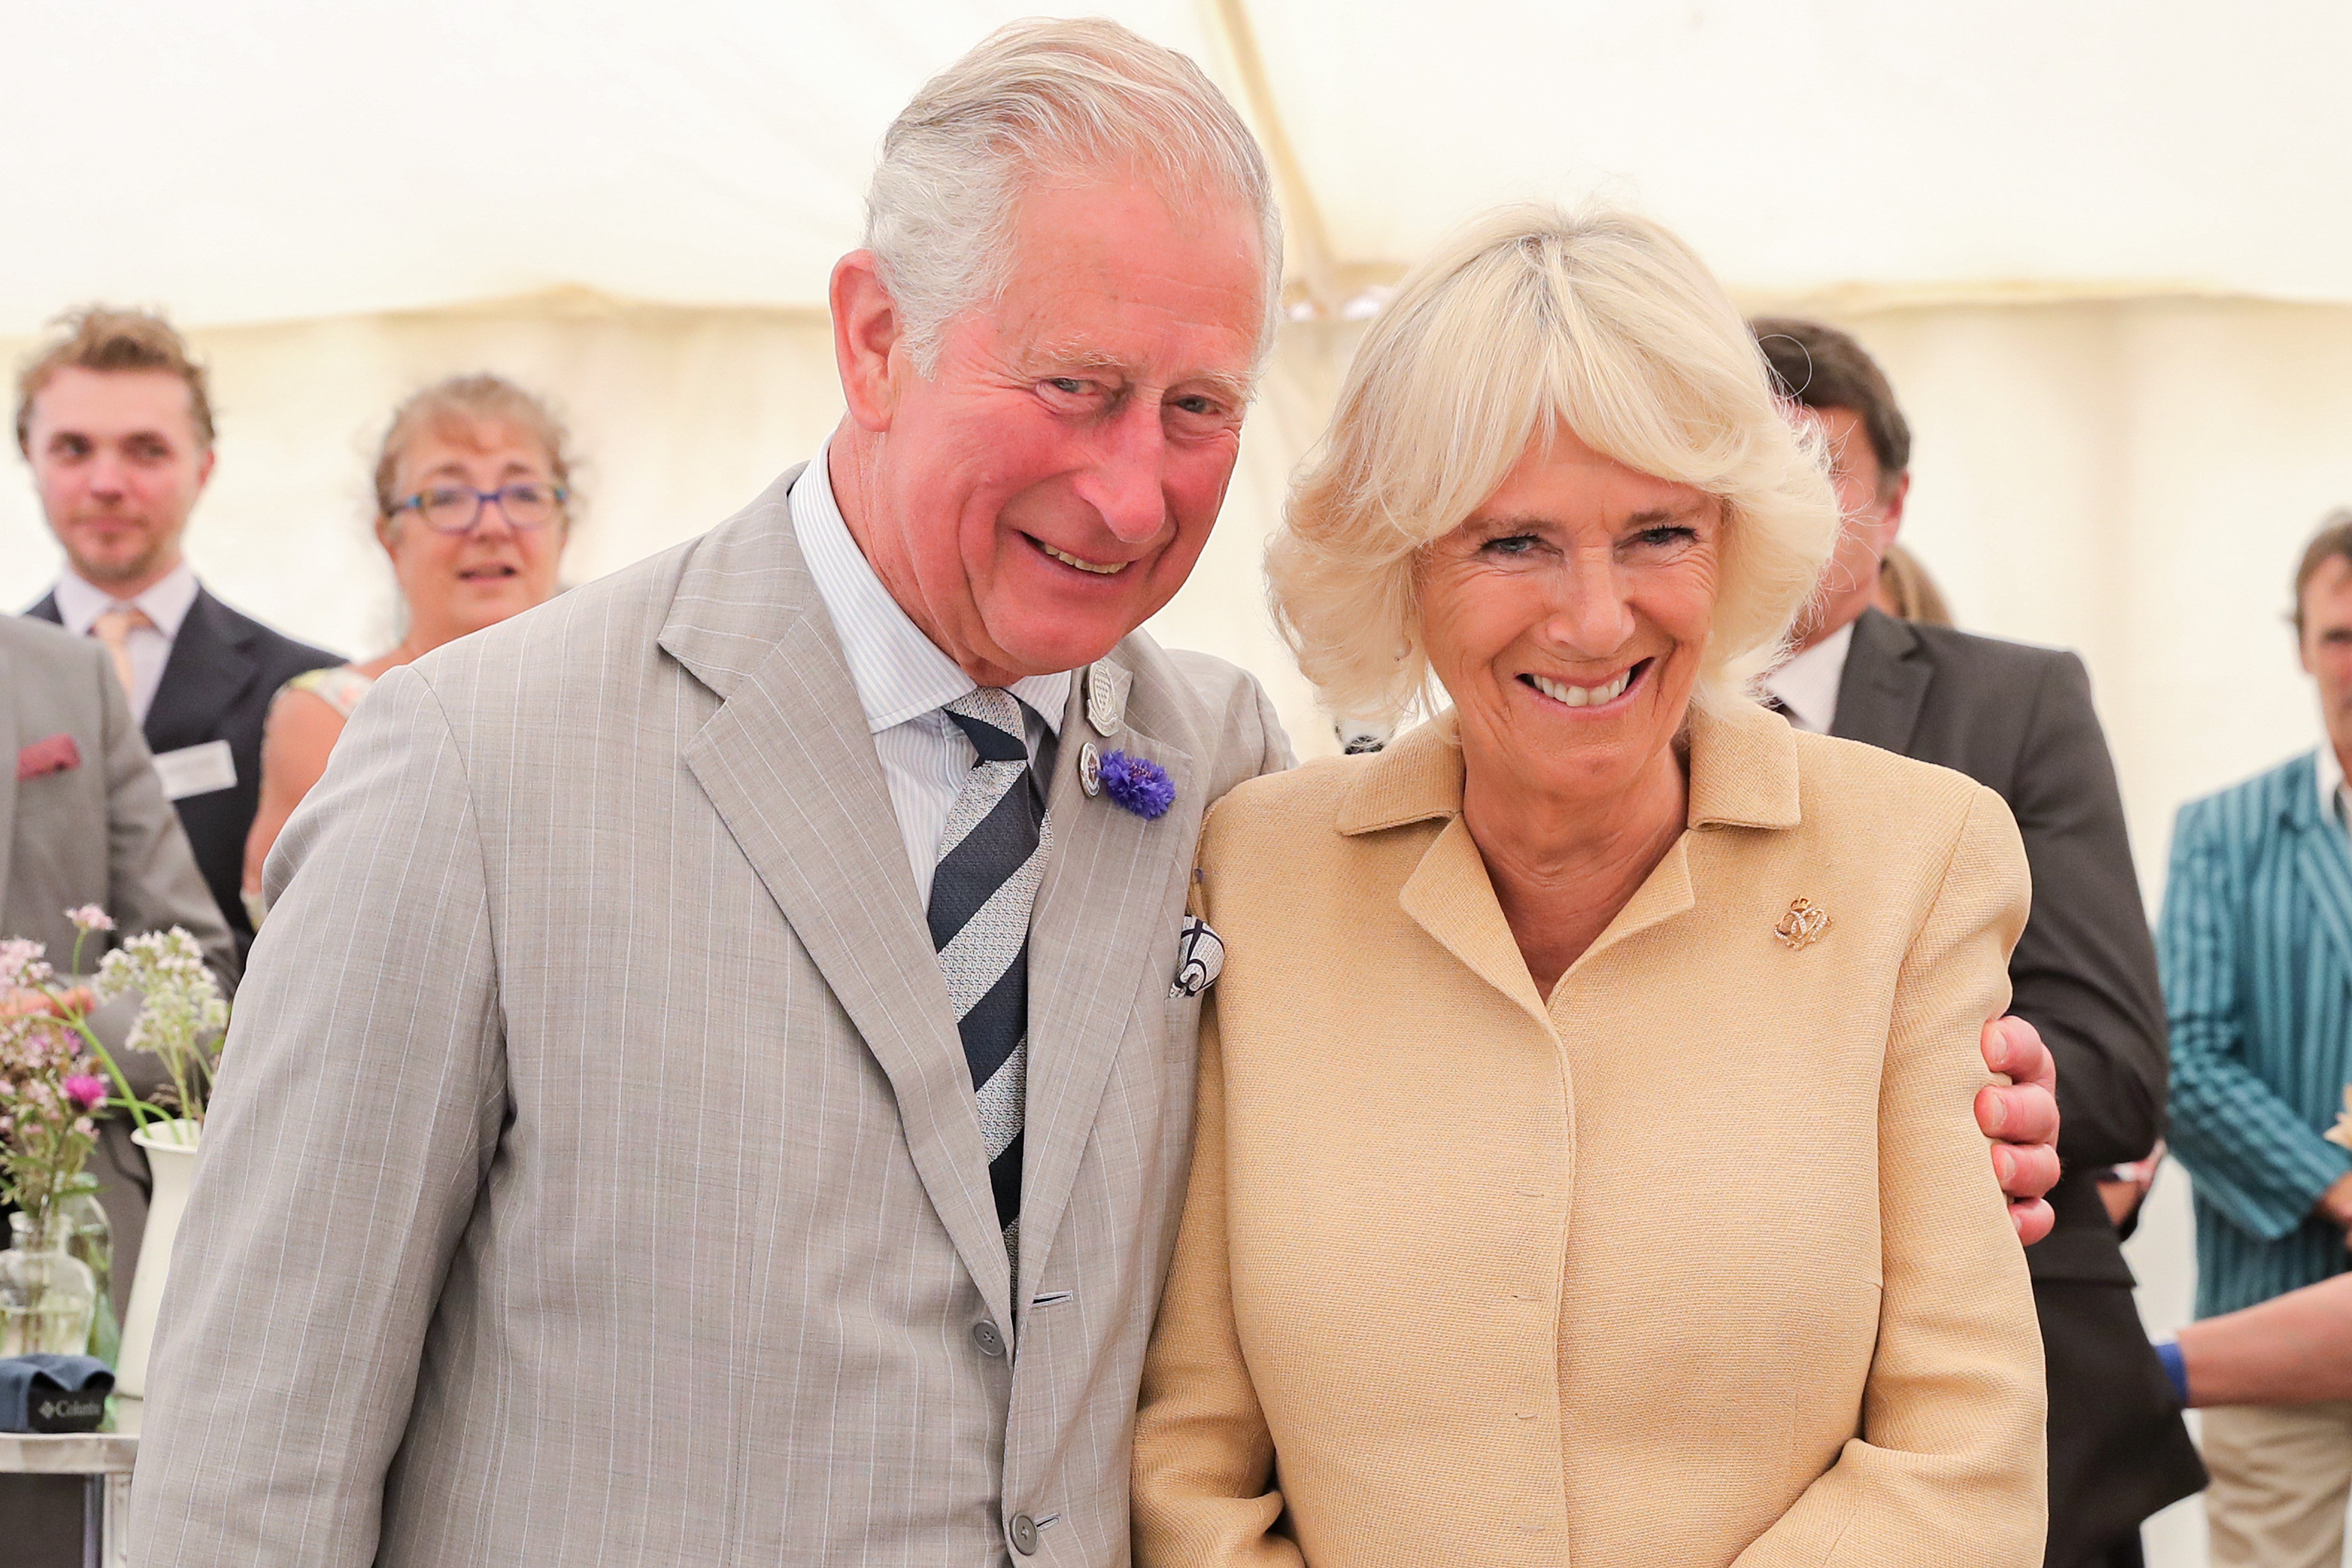 Prince Charles and Duchess Camilla at the National Parks' Big Picnic' celebration during an official visit to Devon & Cornwall on July 17, 2019 in Simonsbath, England | Source: Getty Images